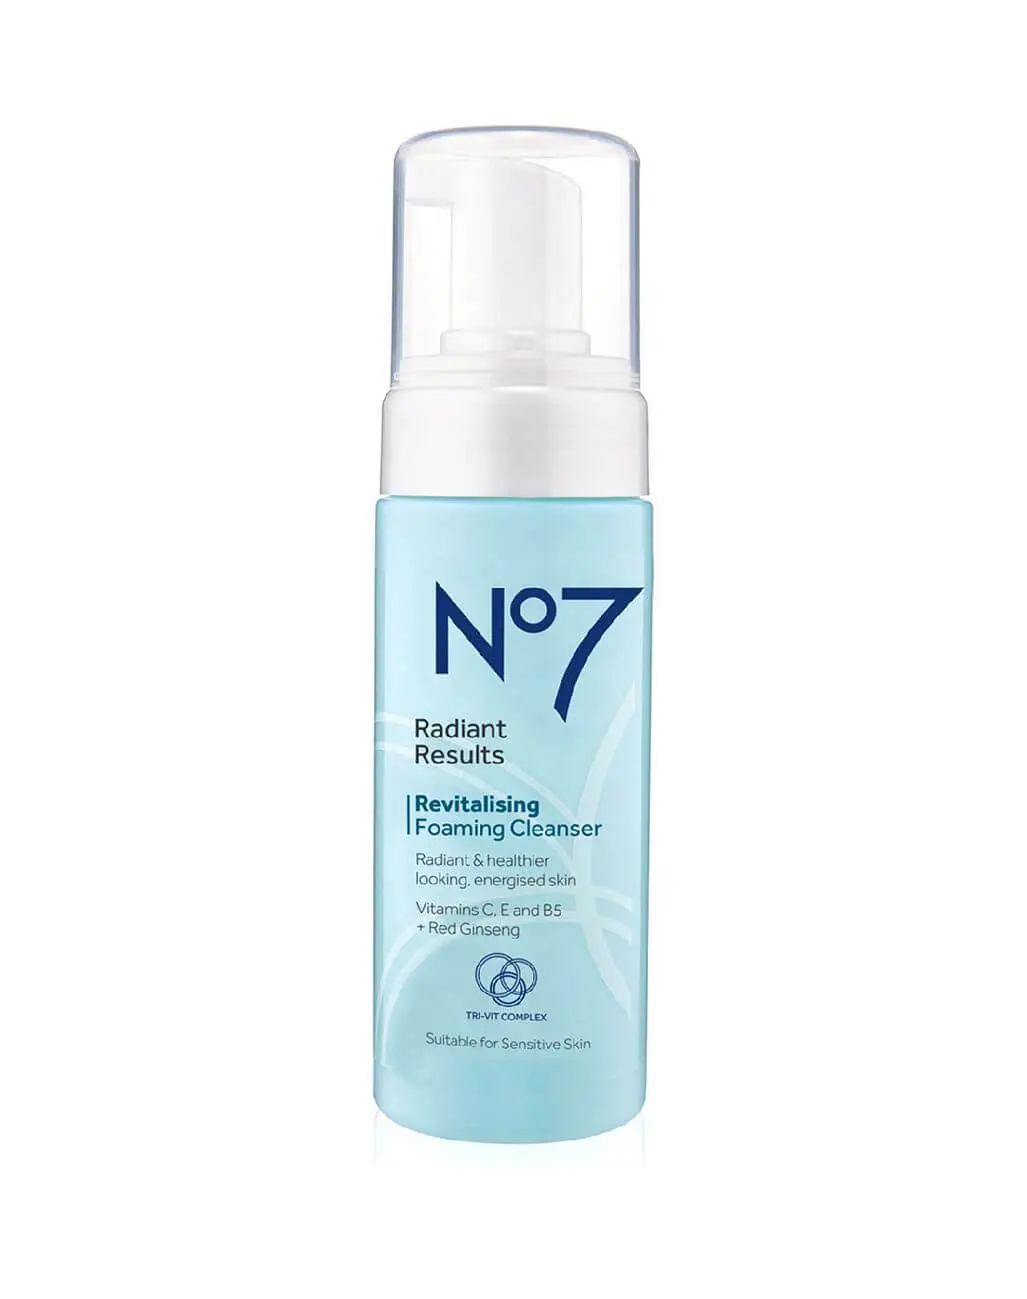 No7 Radiant Results Revitalising Foaming Cleanser